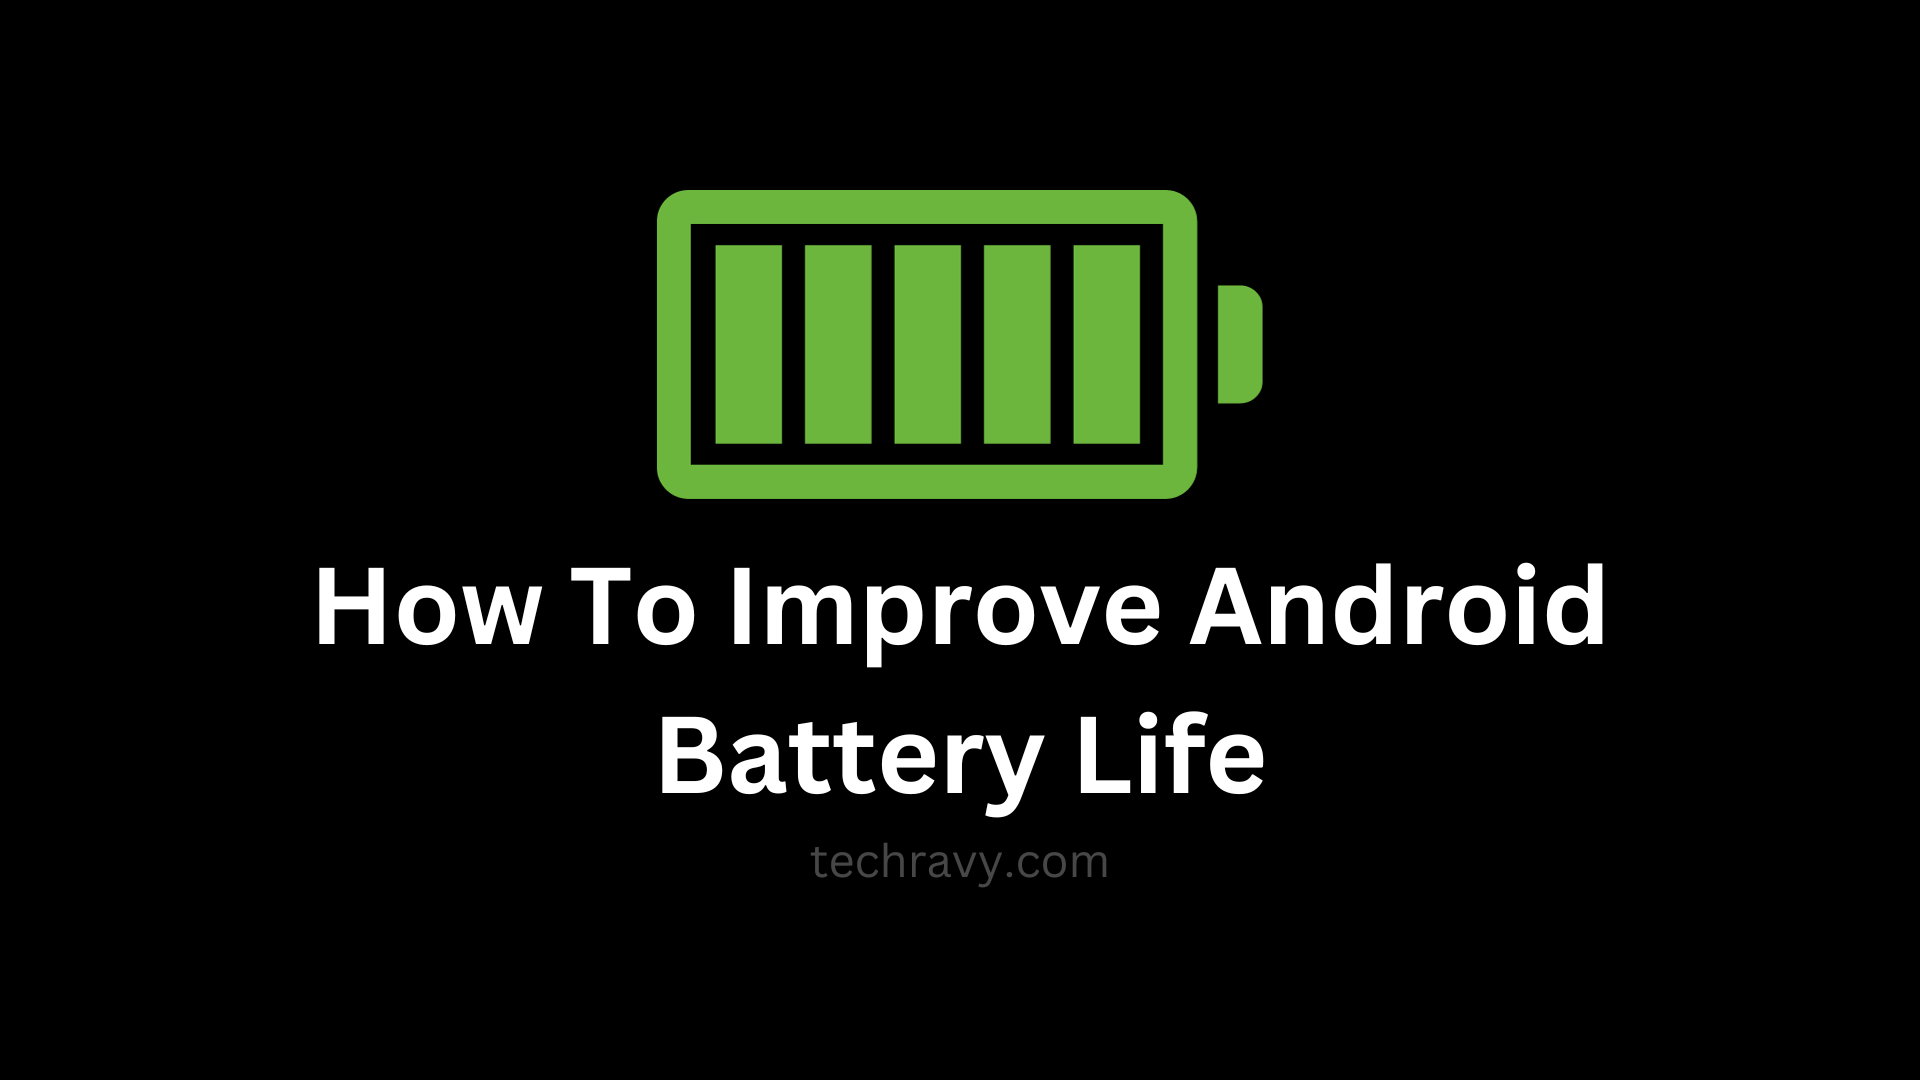 How To Improve Android Battery Life